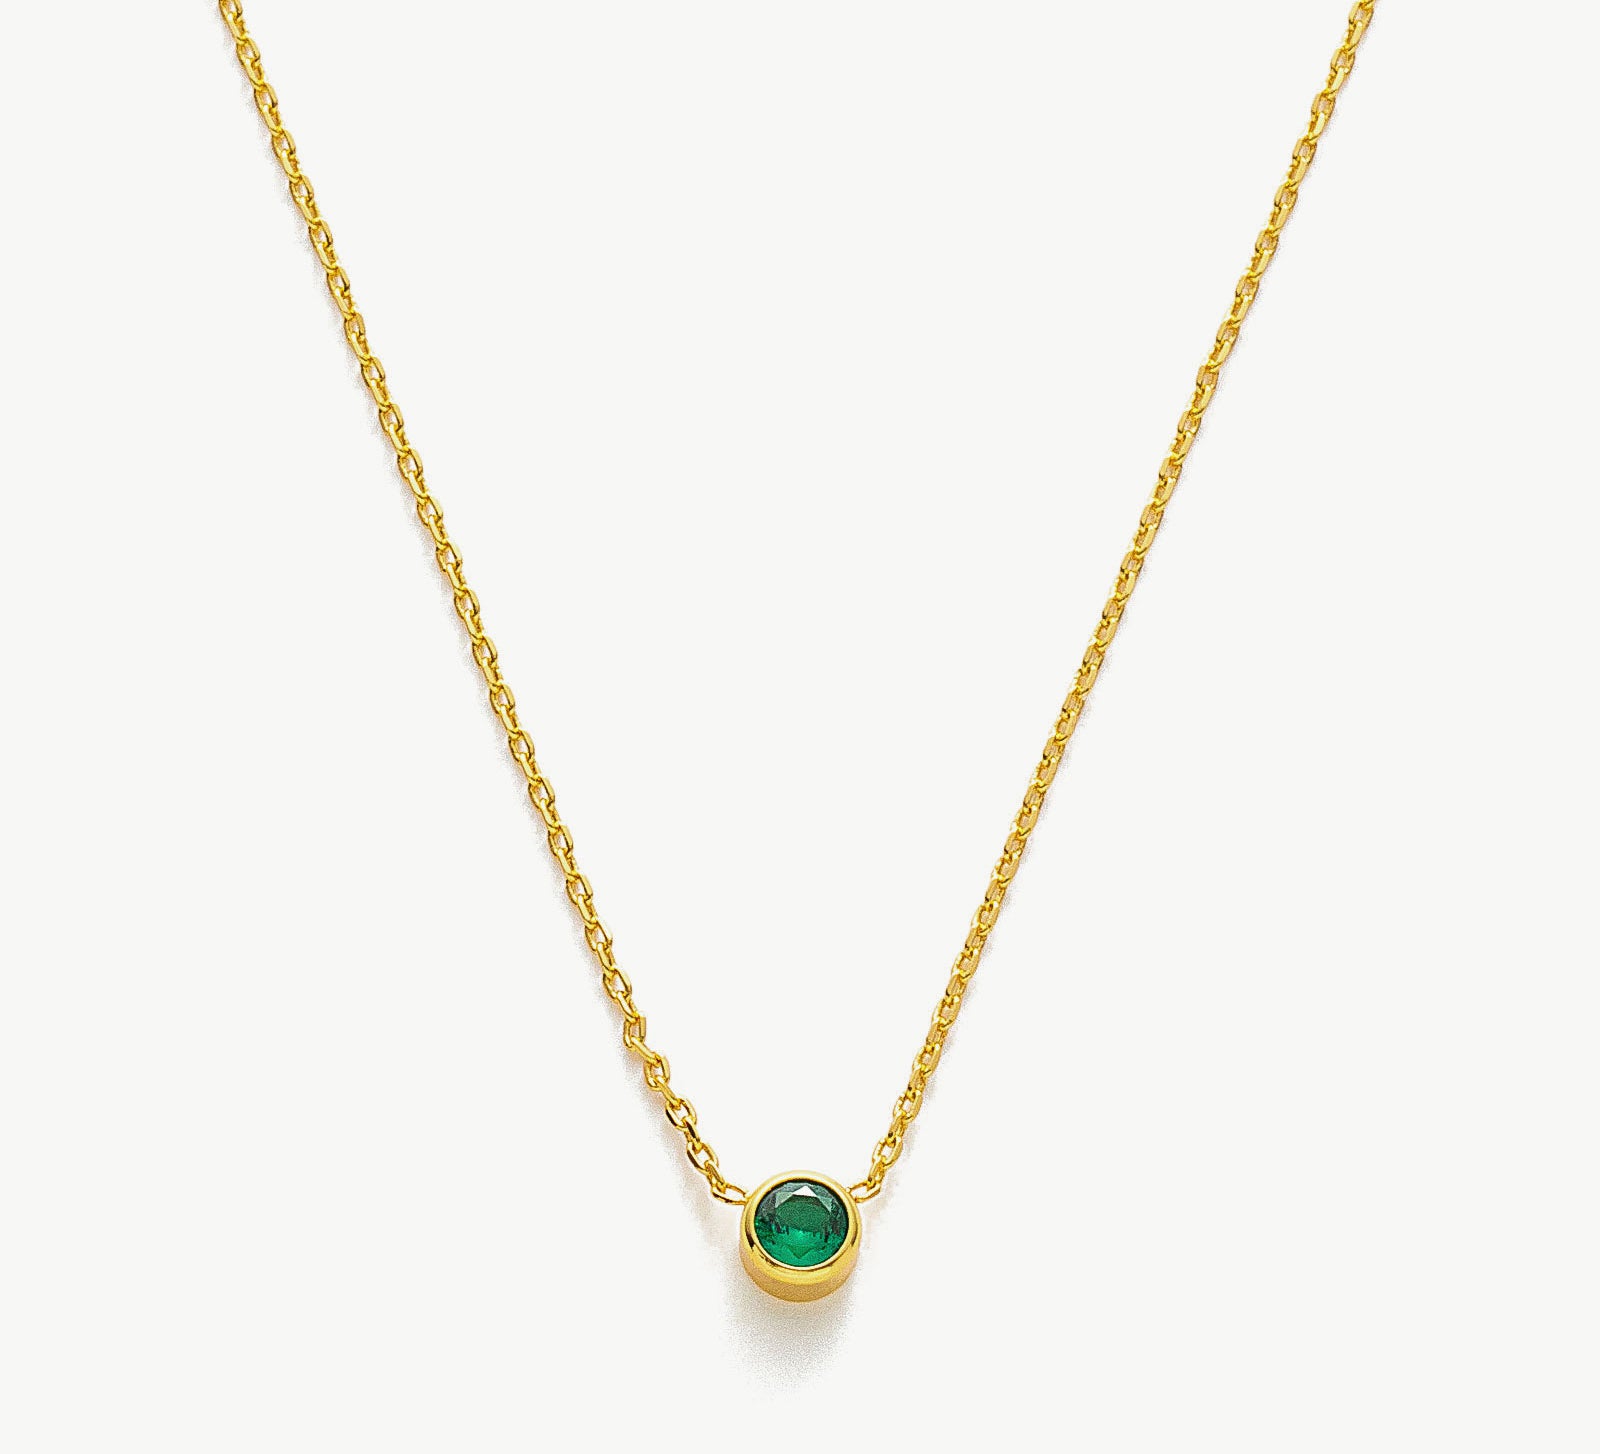 Gold Emerald Crystal Pendant Necklace, showcasing a vibrant emerald green crystal pendant on a delicate gold chain, adding a touch of elegance to your style.